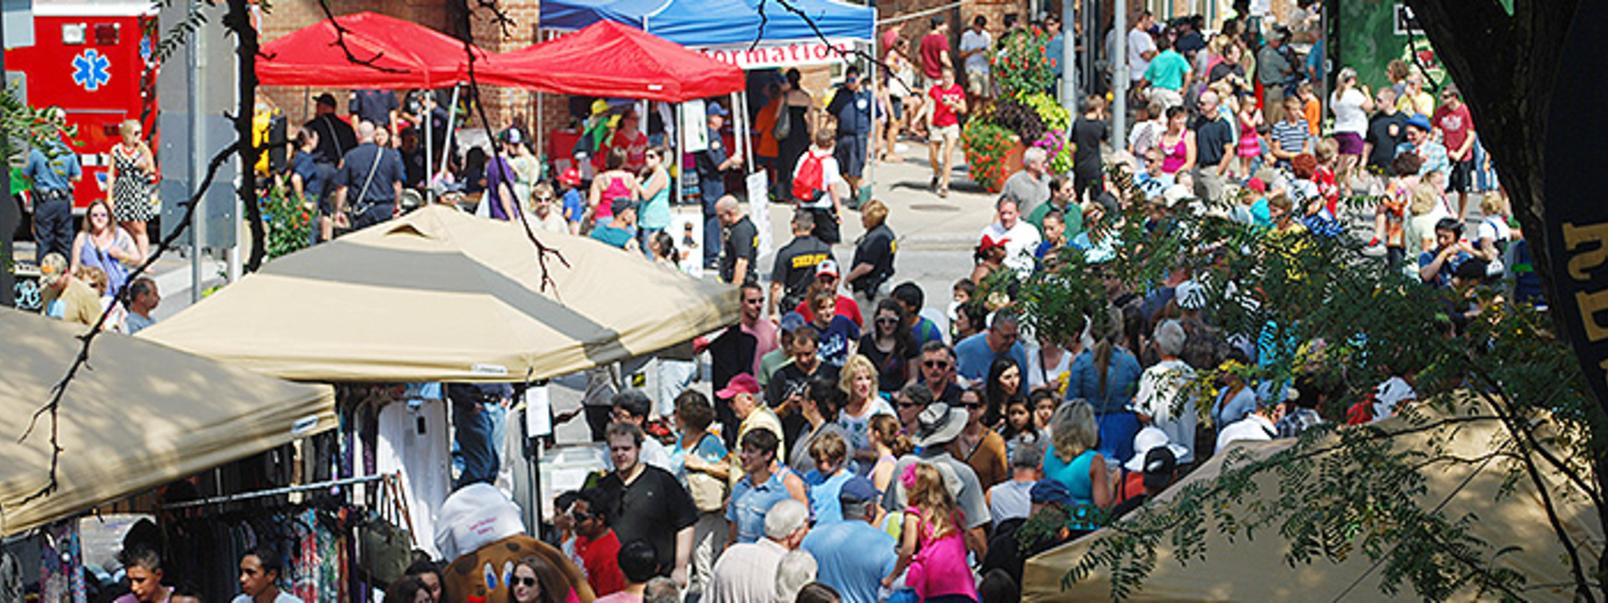 Kennett Square Bursts With Pride Celebrating the 33rd Annual Mushroom Festival pic pic